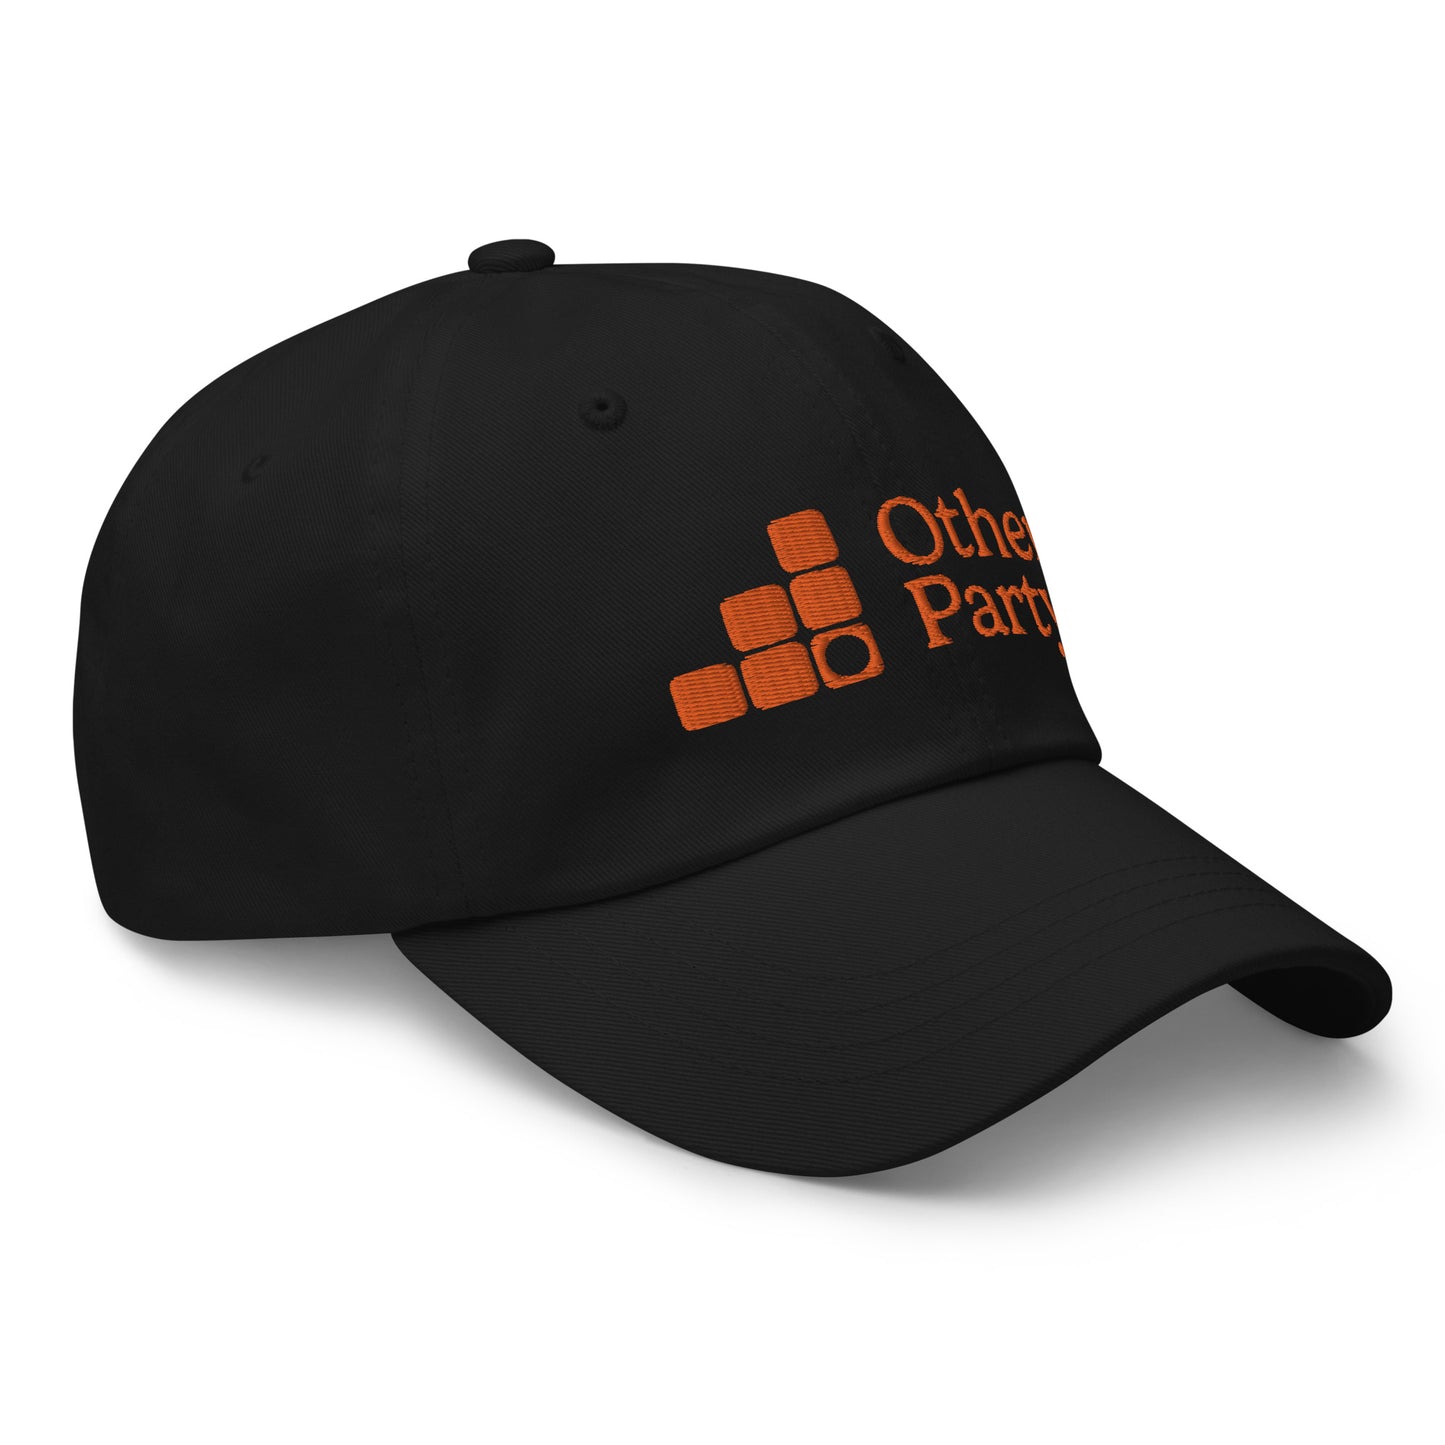 Other Party Logo Dad hat